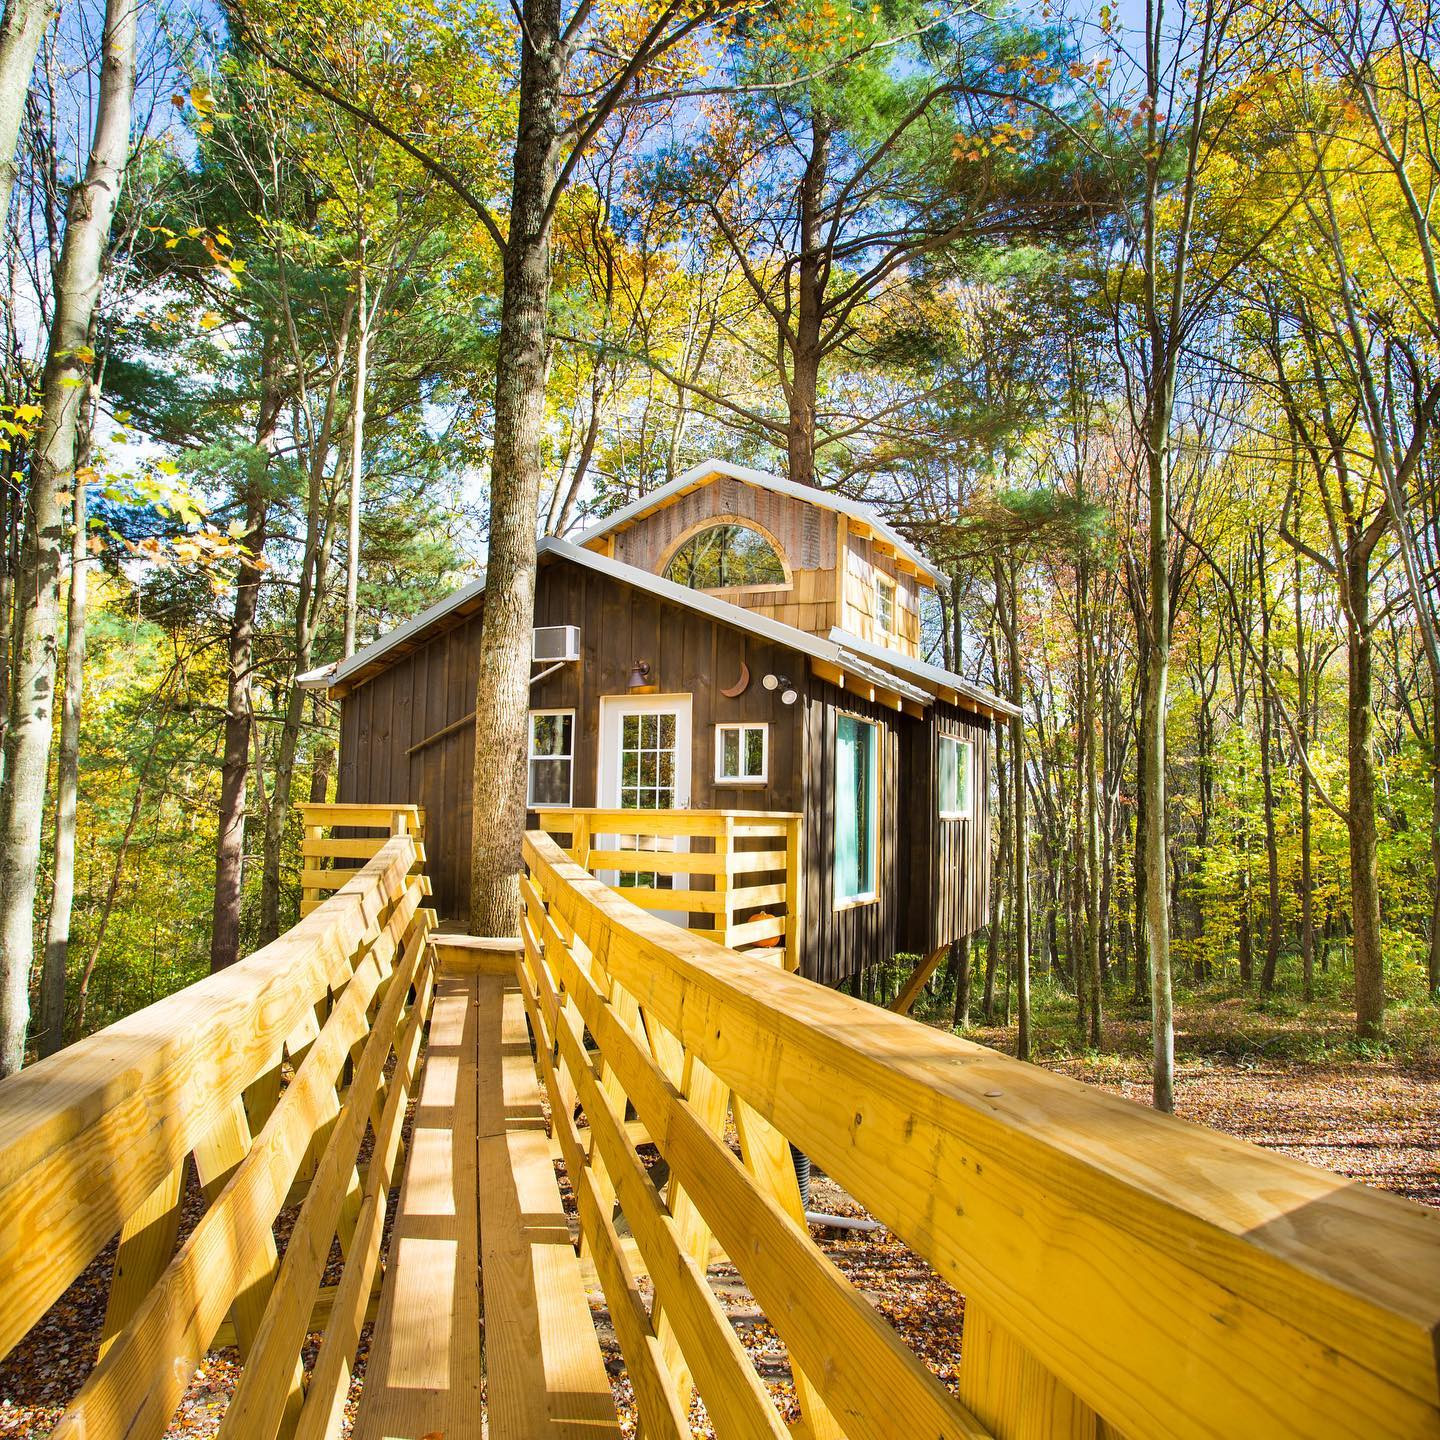 The Mohican Treehouse Resort airbnb